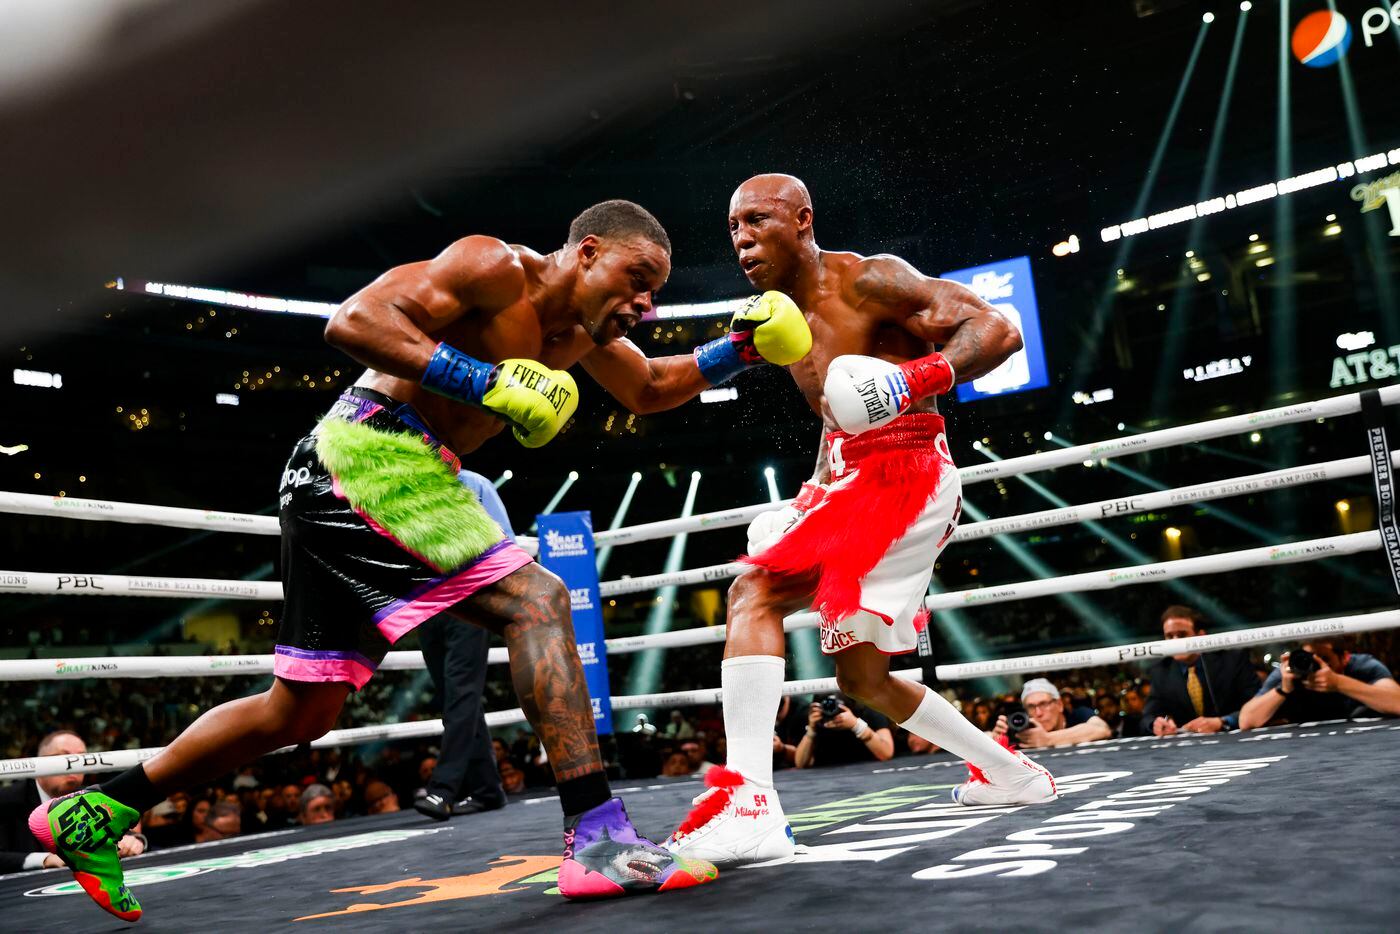 DeSoto’s Errol Spence Jr. (left) box Yordenis Ugas during a welterweight championship boxing...